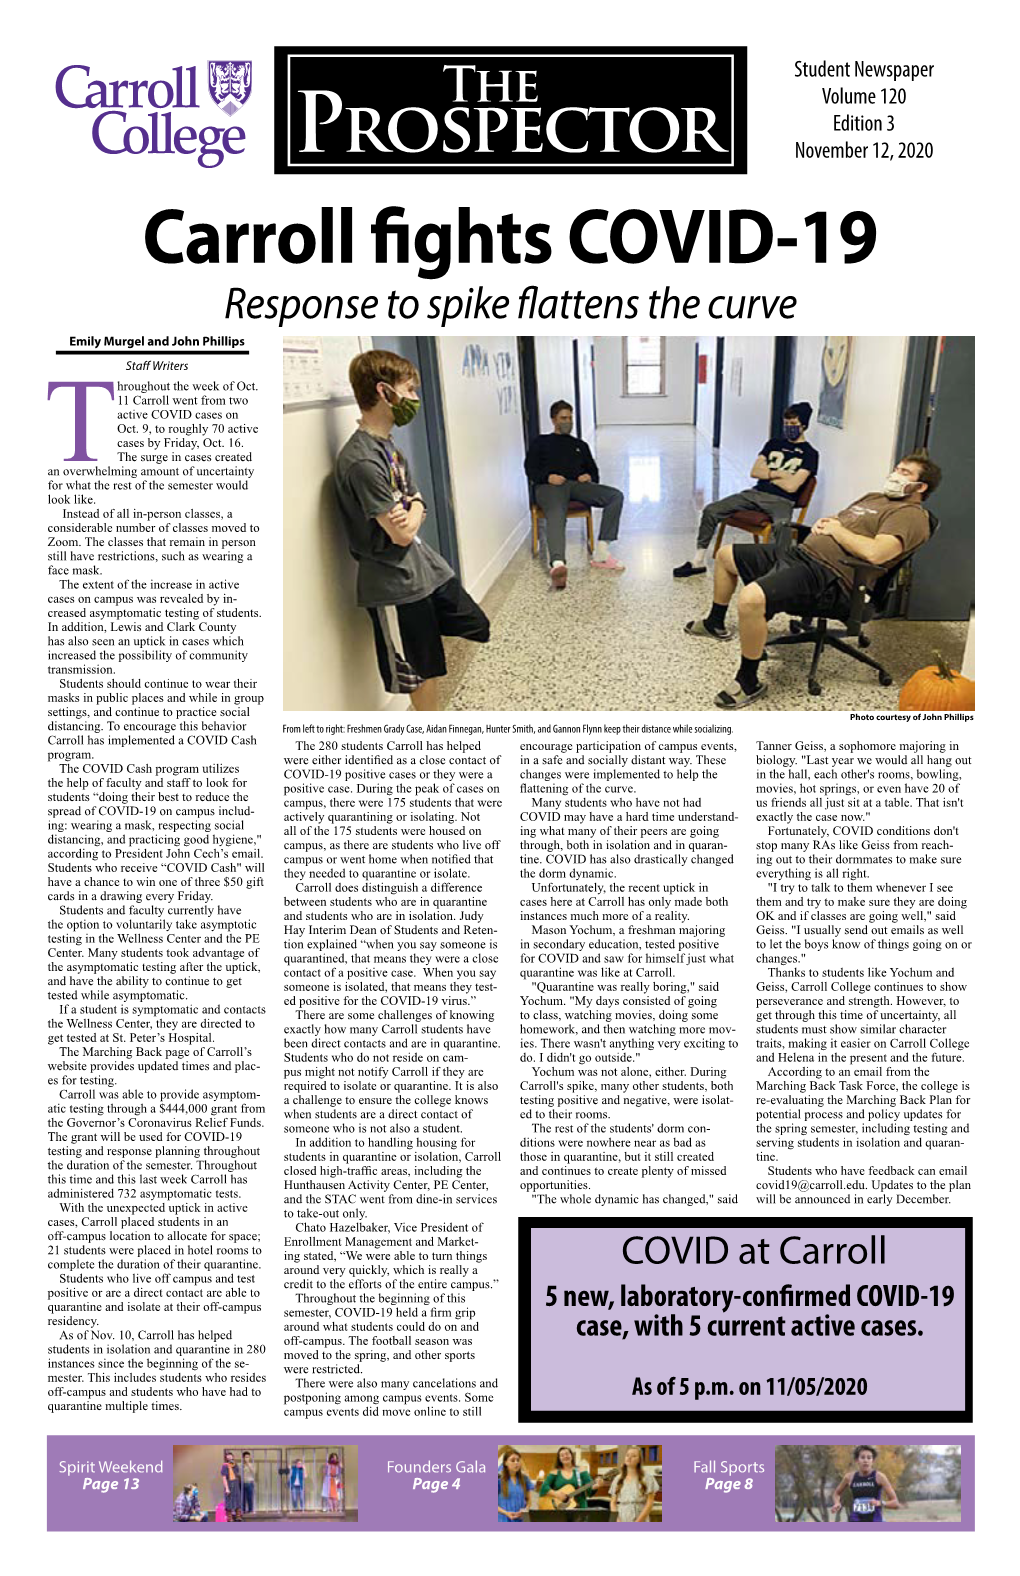 Carroll Fights COVID-19 Response to Spike Flattens the Curve Emily Murgel and John Phillips Staff Writers Hroughout the Week of Oct